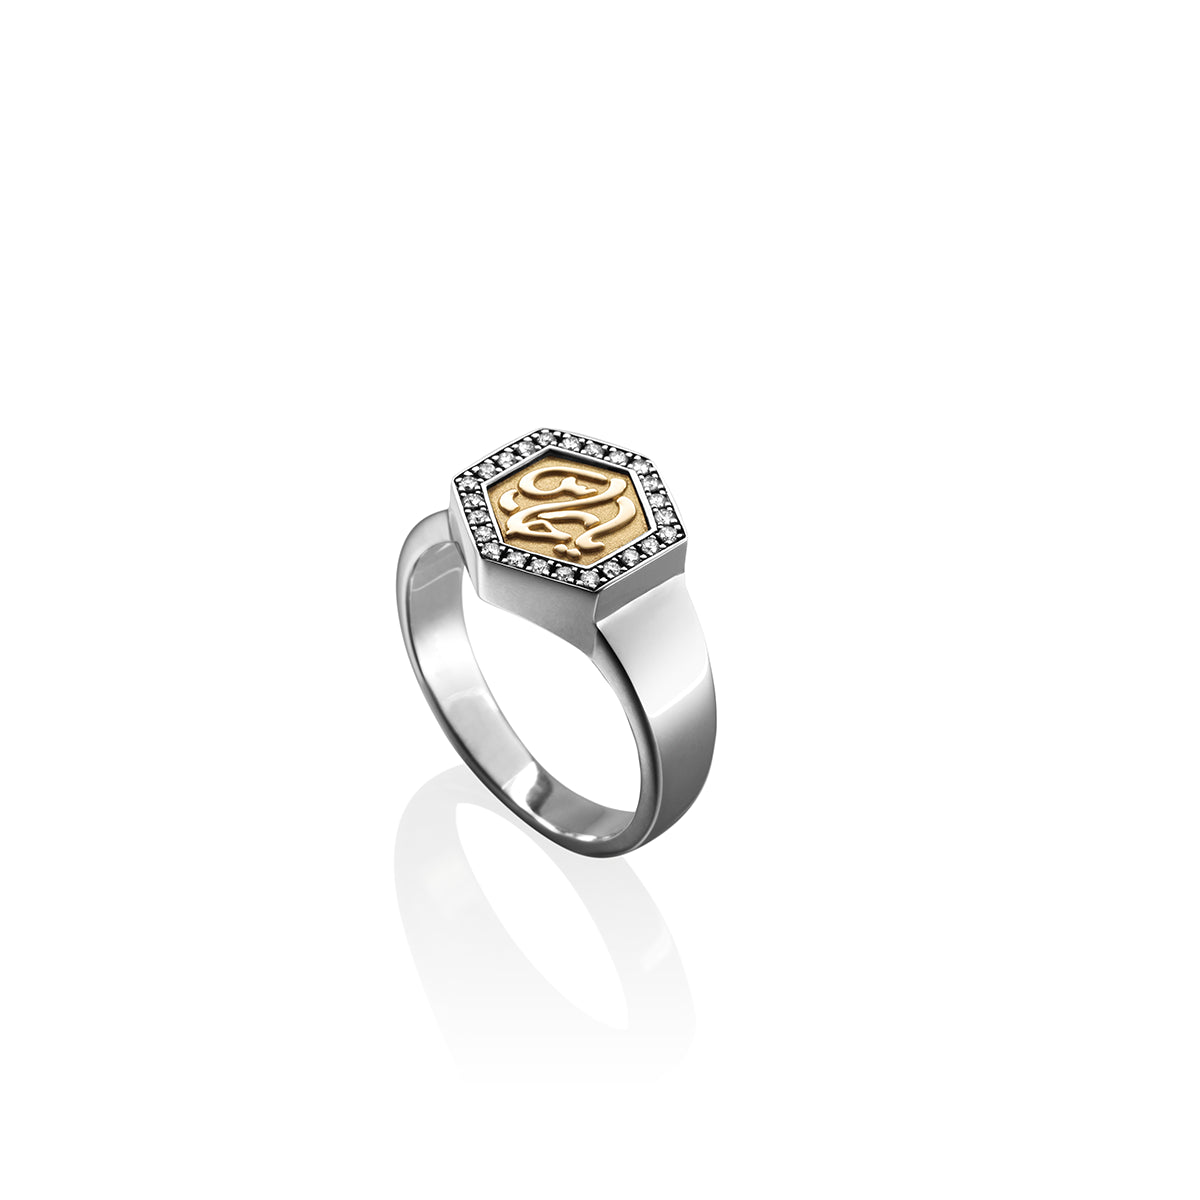 Guardian Ring by Azza Fahmy - Designer Rings